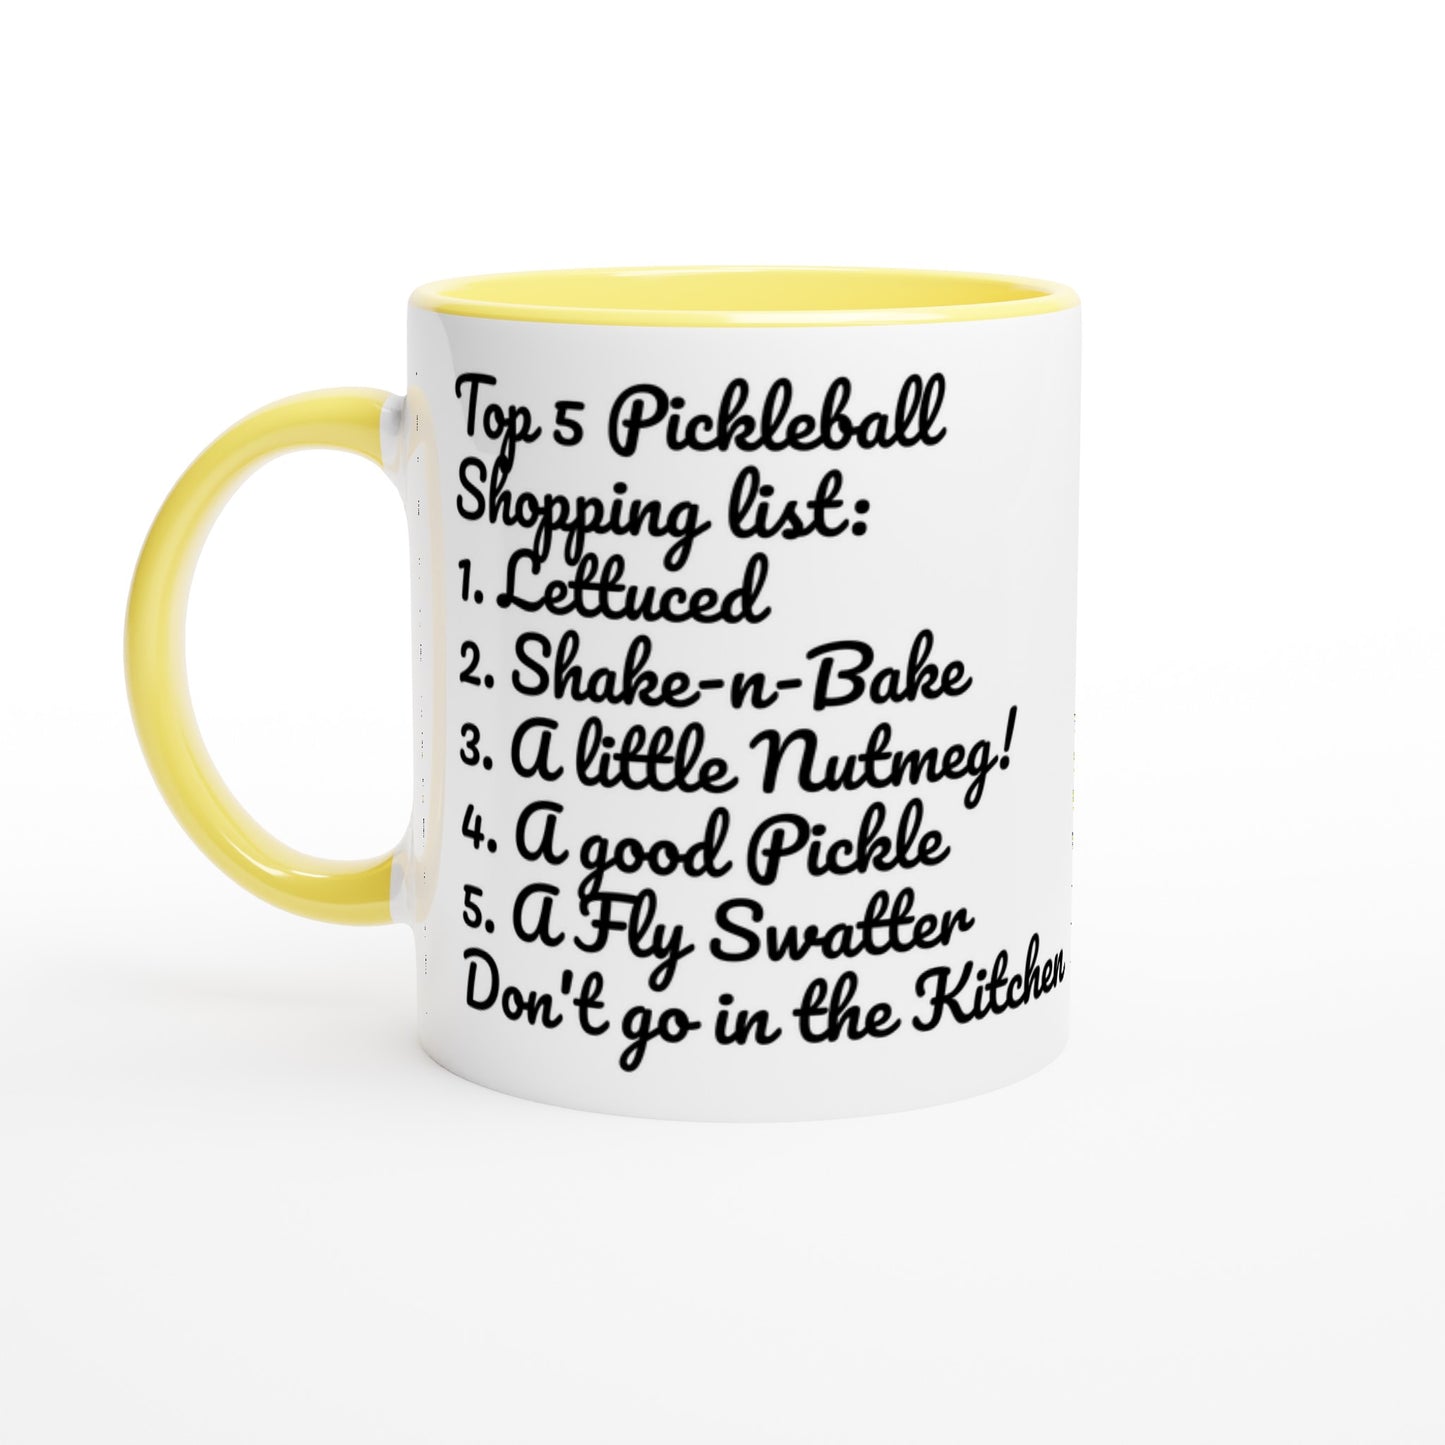 White ceramic 11oz mug with yellow handle original motto Top 5 Pickleball Shopping list lettuce, Shake-n-bake, Nutmeg, Pickle, a Fly Swatter Don’t go in the kitchen front side and Let's Play PickleBall logo on back dishwasher and microwave safe ceramic coffee mug from WhatYa Say Apparel front view.